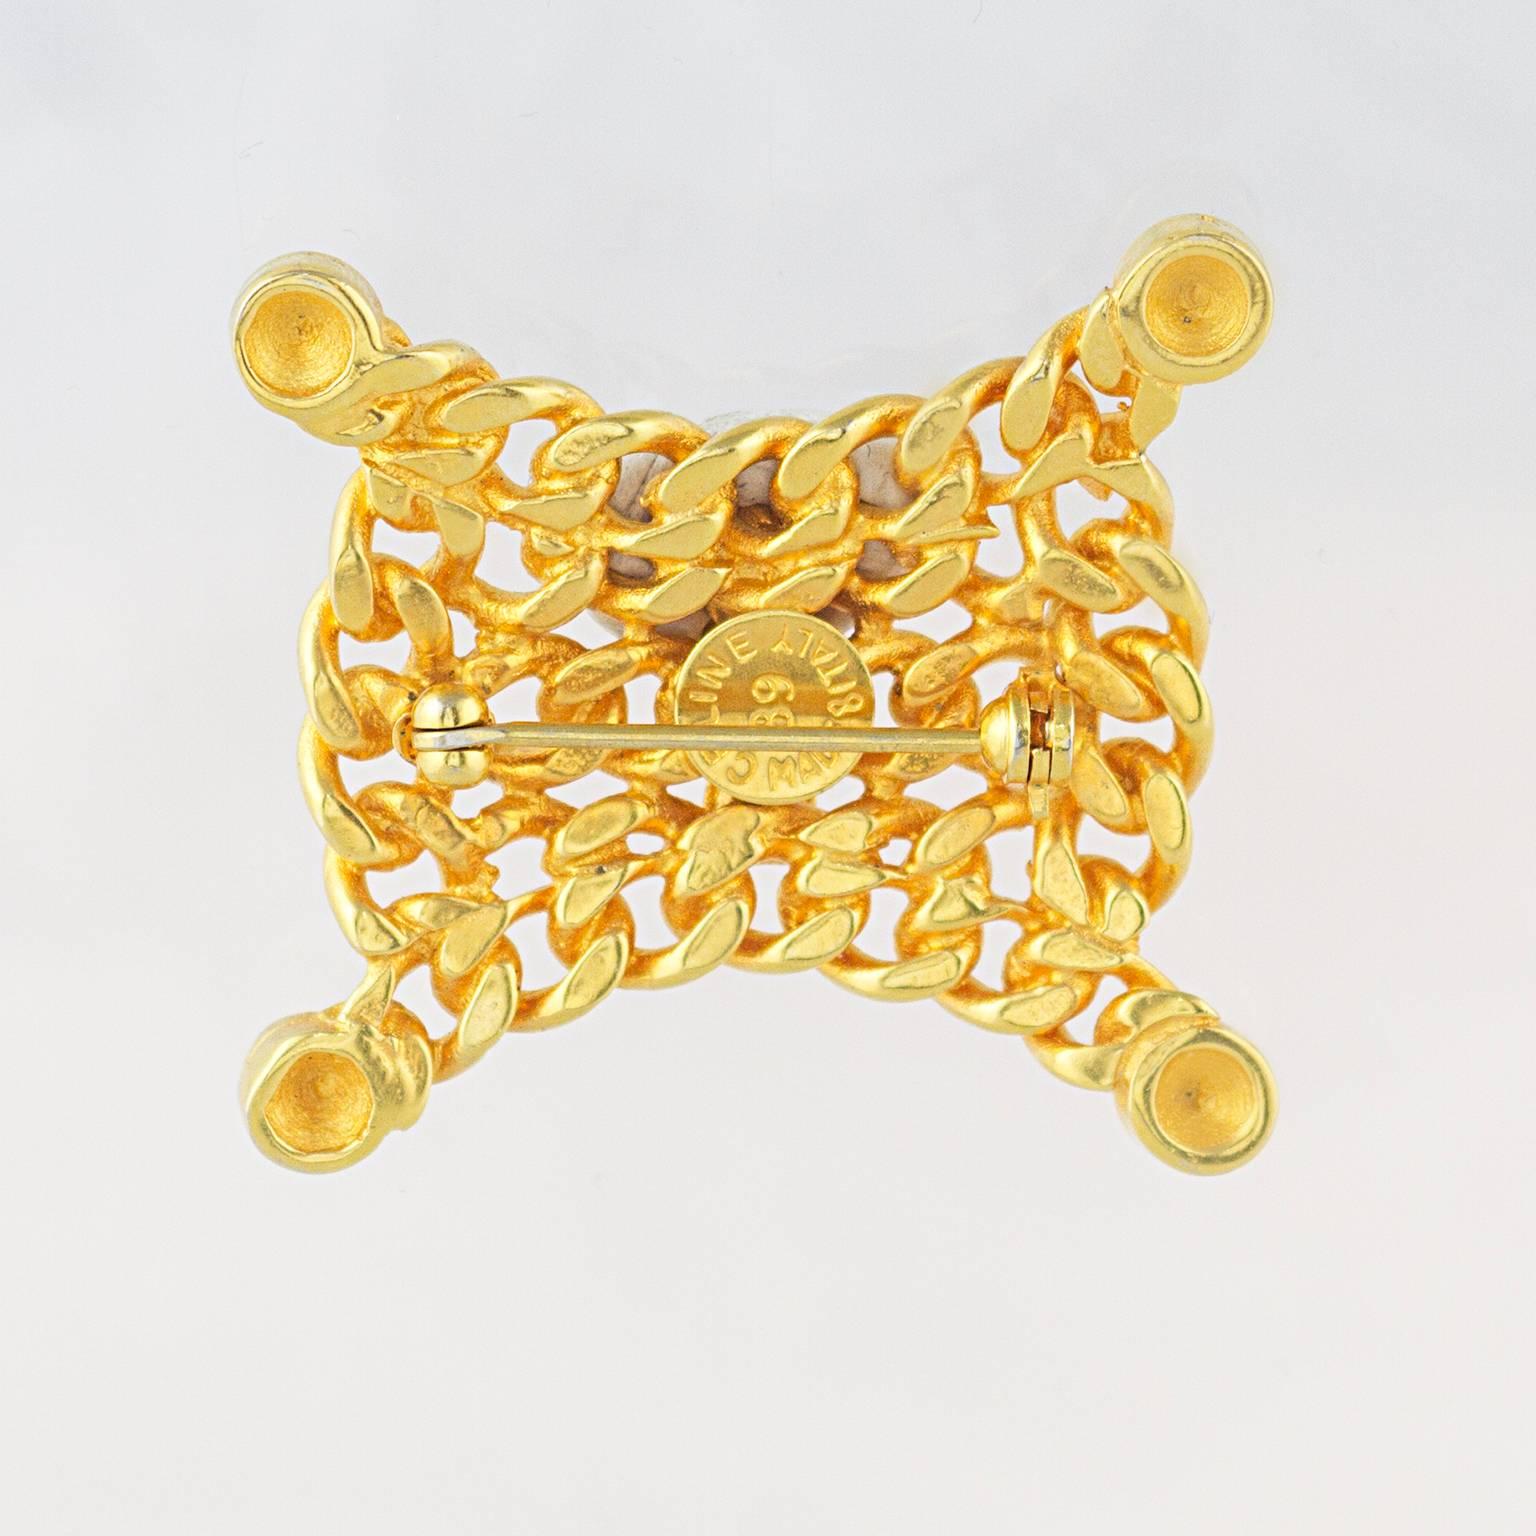 A fashionable Celine Paris logo brooch in high carat gold plated metal.
Made in 1989.
Fully signed. 
In an excellent never worn condition. 
Don't hesitate to contact us with any queries or image requests.